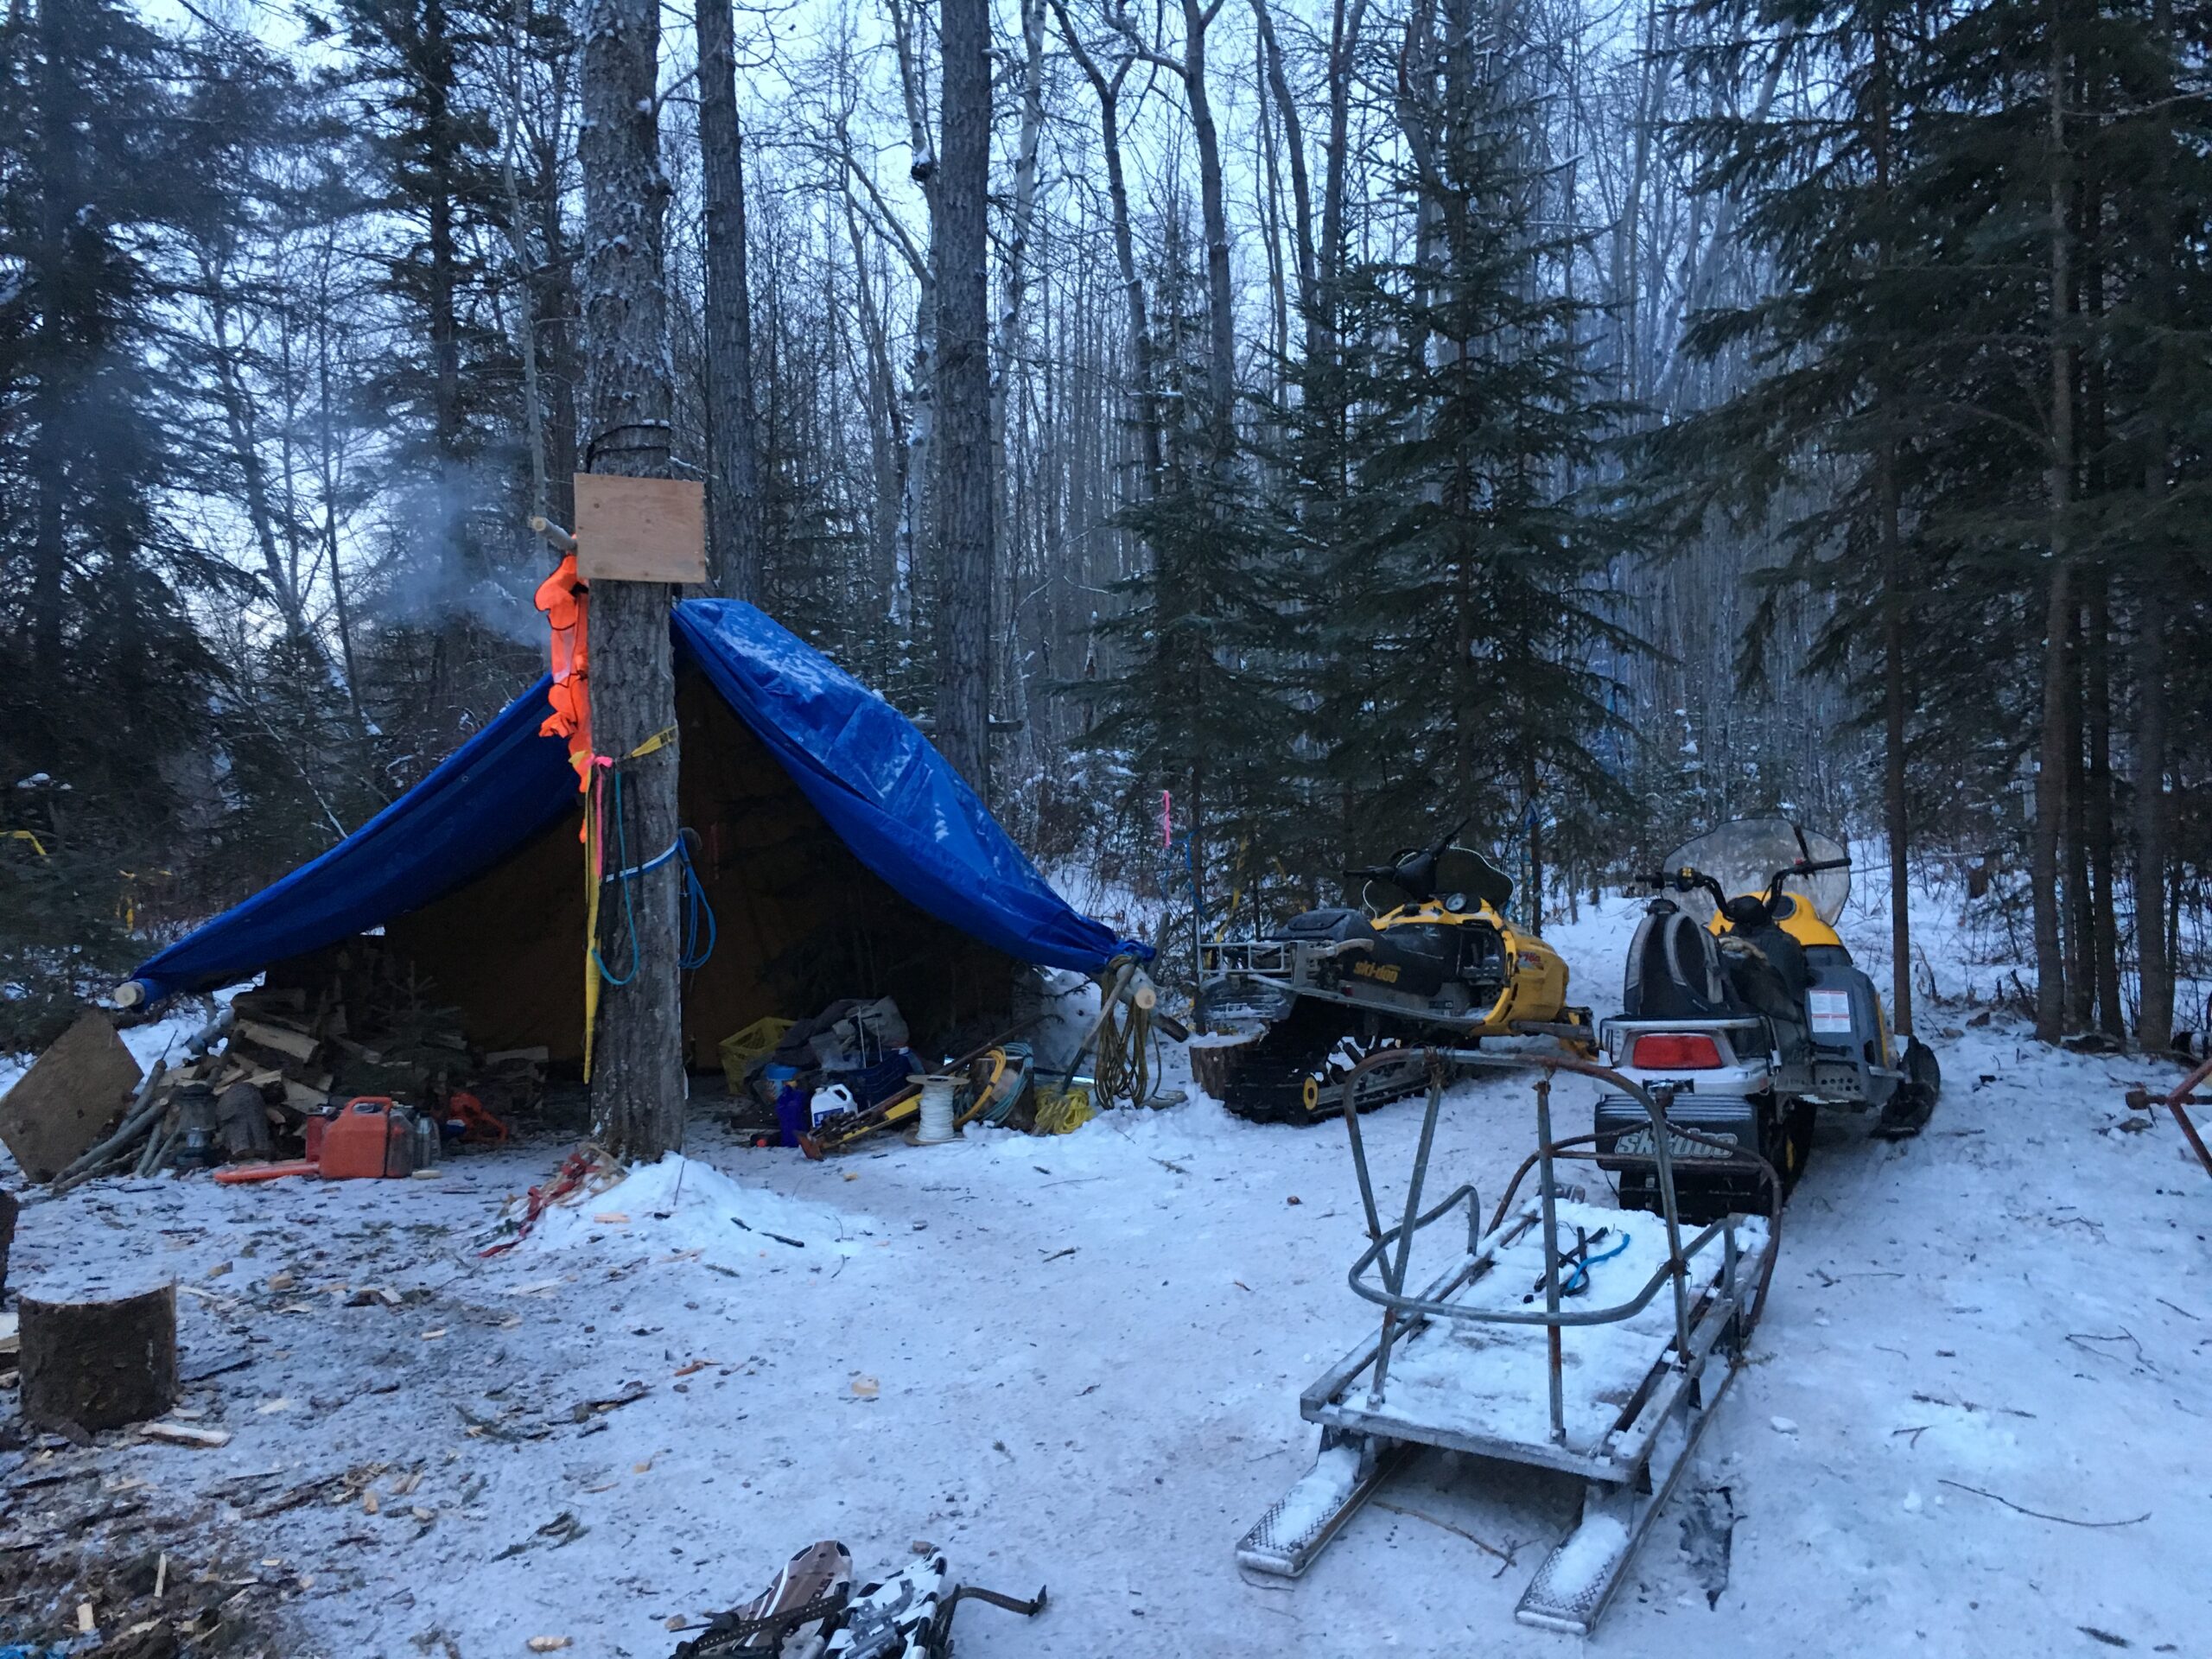 The remote Rocky Mountain Fort camp, where people were protesting the Site C dam construction